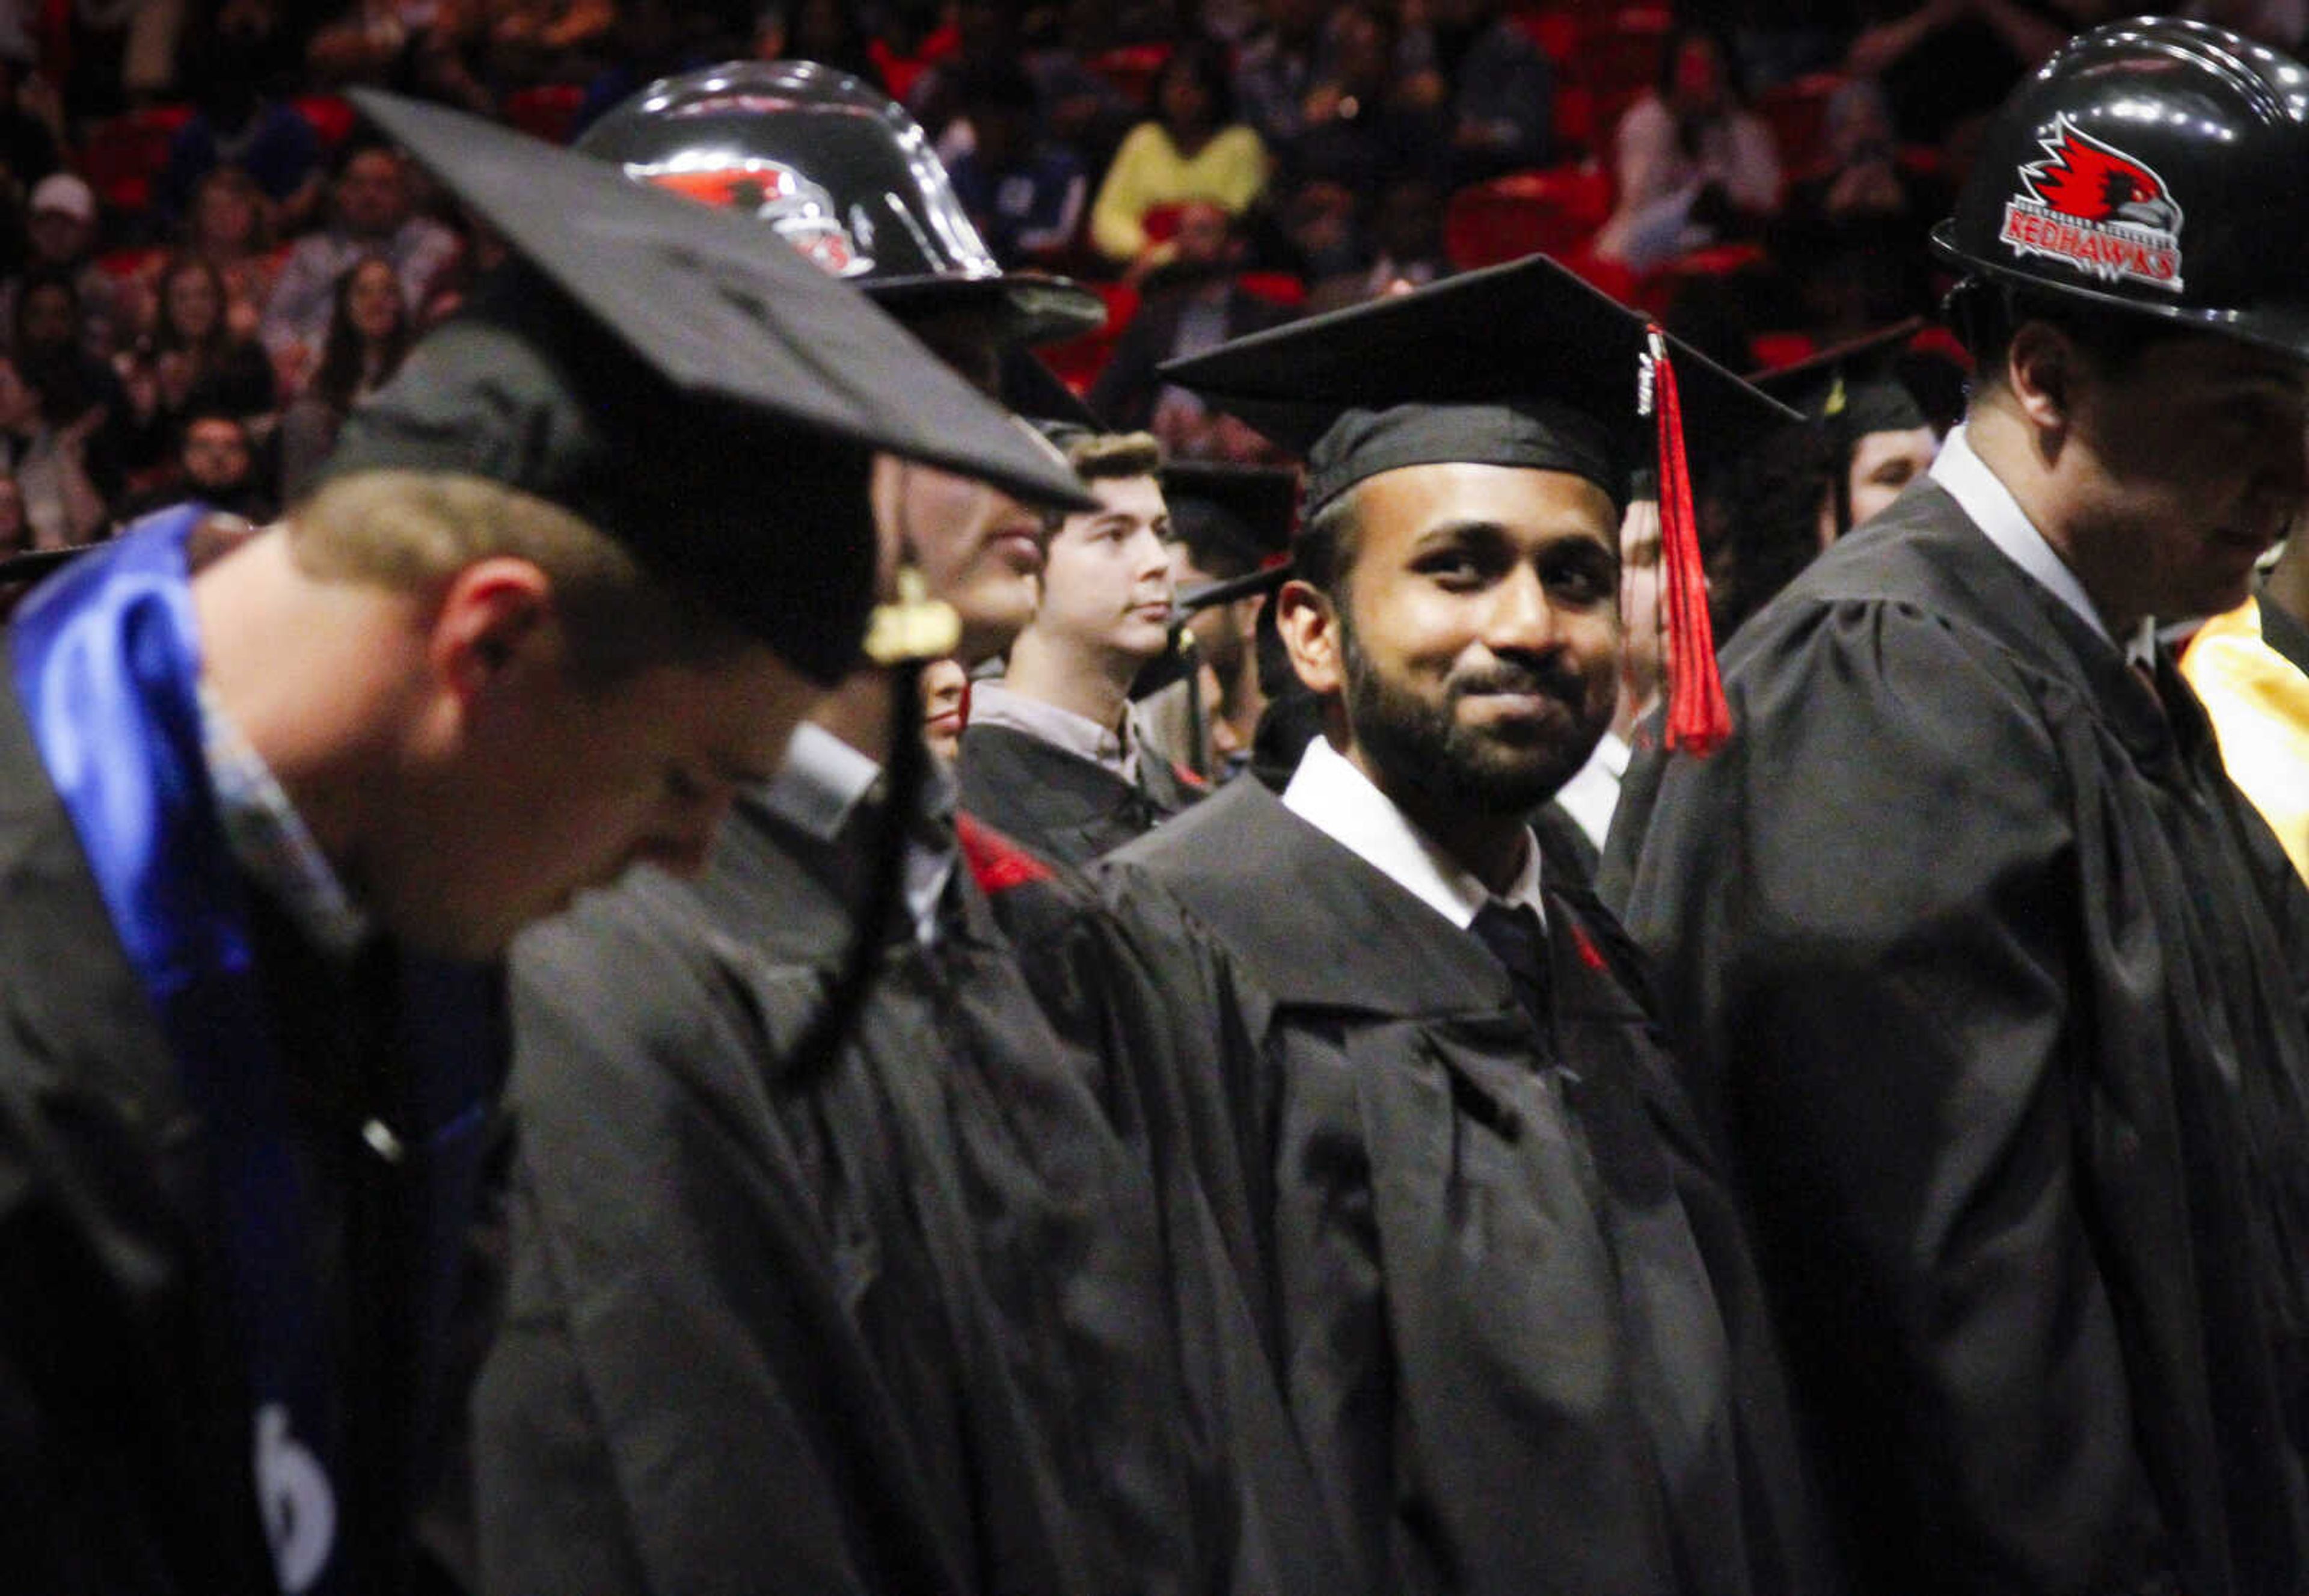 A graduation candidate gazes towards the audience at Southeast Missouri State University's winter commencement ceremony on Saturday, Dec. 14, at the Show Me Center in Cape Girardeau, Missouri.